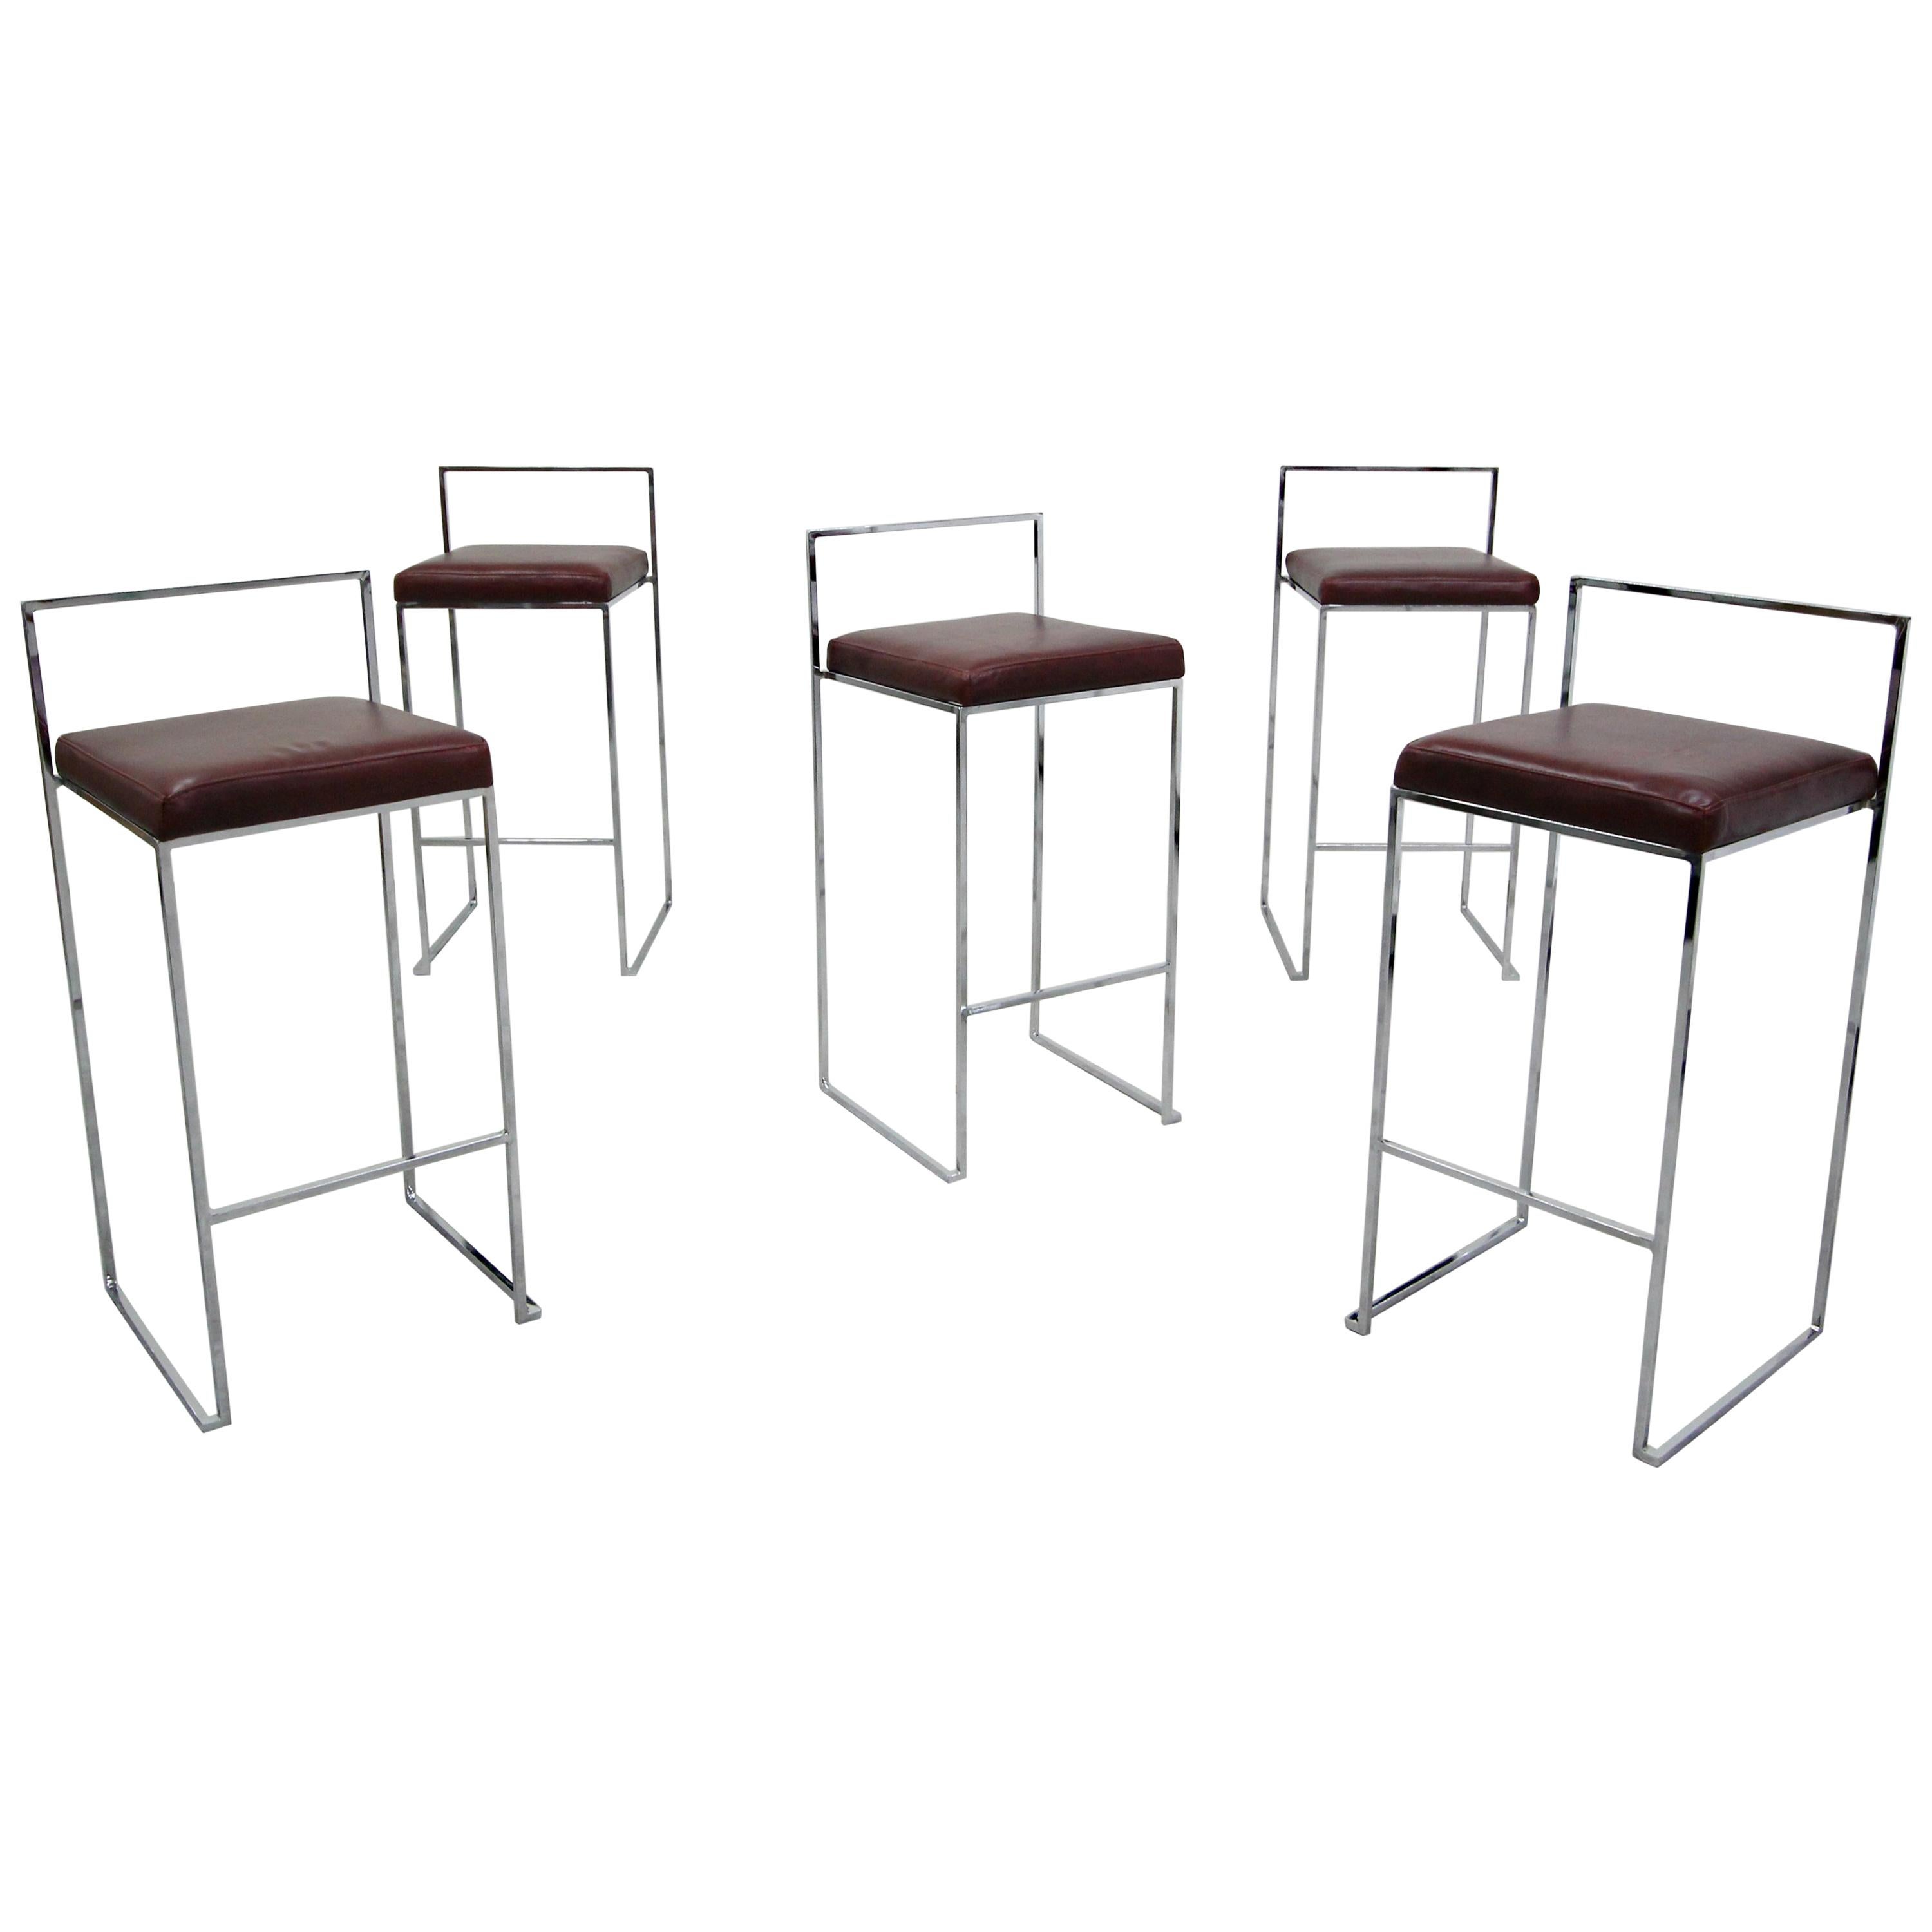 Set of Five Mid Century Thin Line Chrome and Leather Bar Stools by Milo Baughman